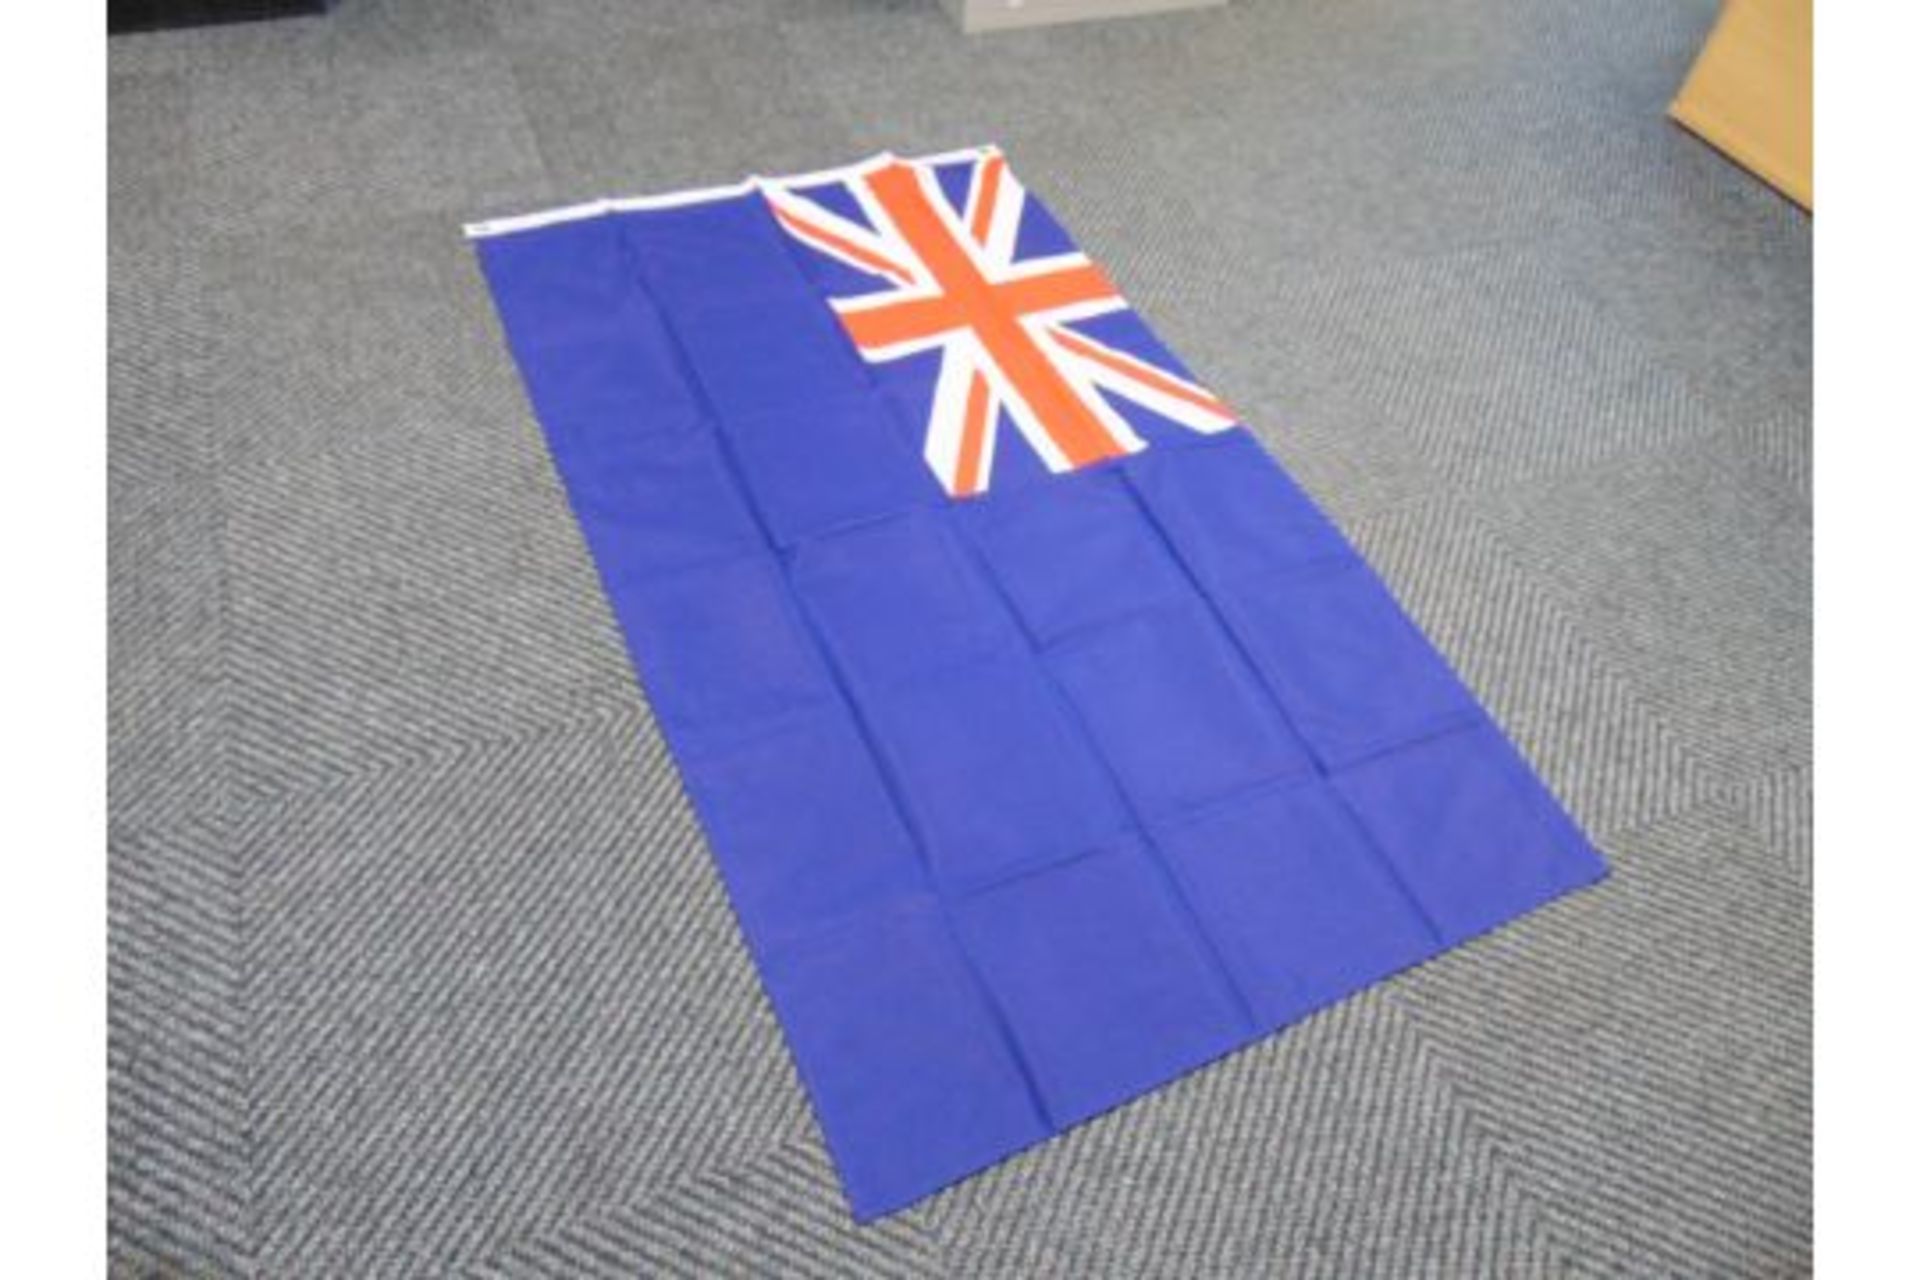 Blue Ensign Flag - 5ft x 3ft with Metal Eyelets. - Image 4 of 5